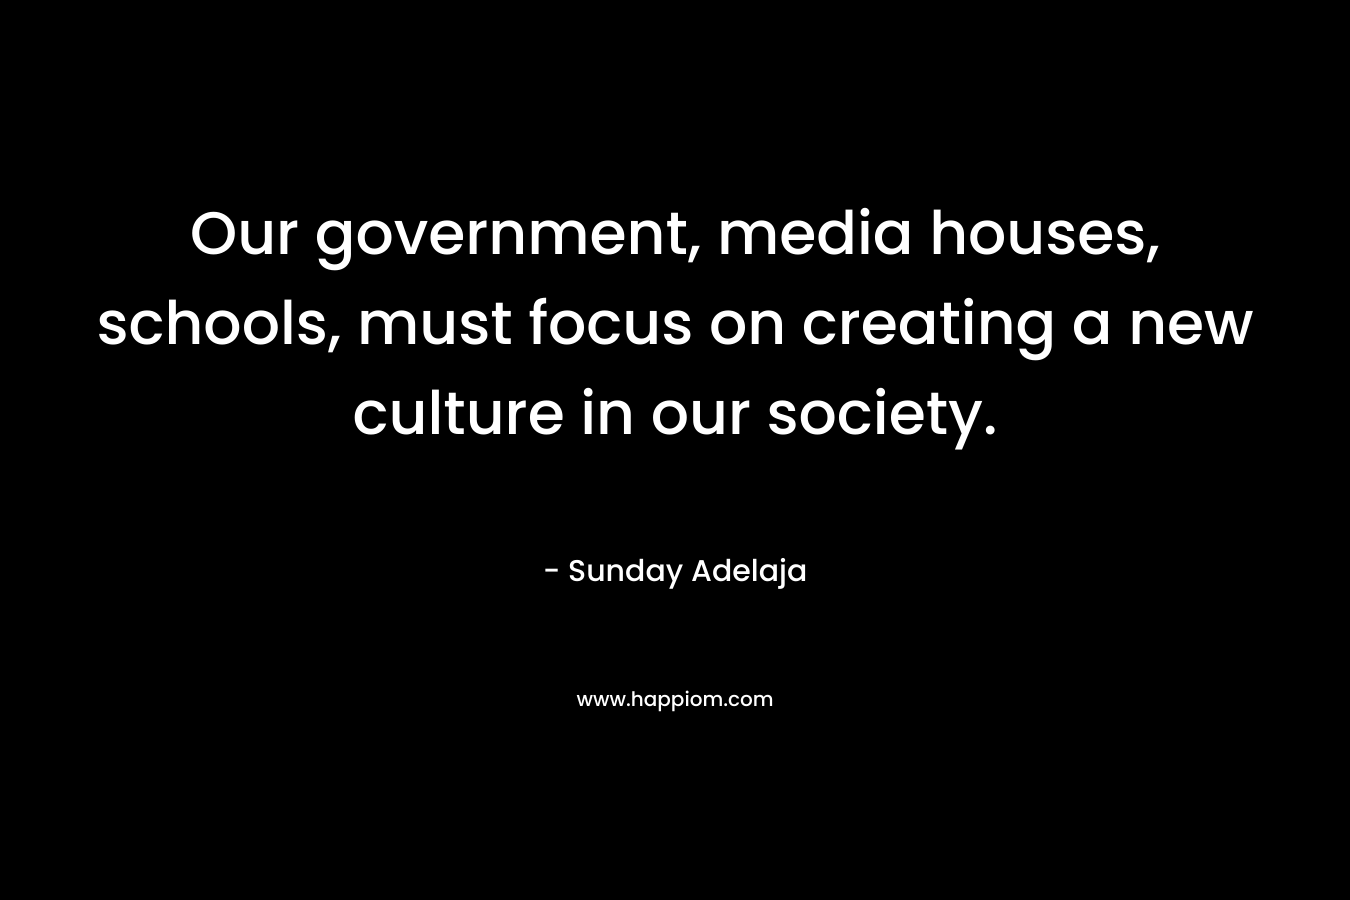 Our government, media houses, schools, must focus on creating a new culture in our society. – Sunday Adelaja